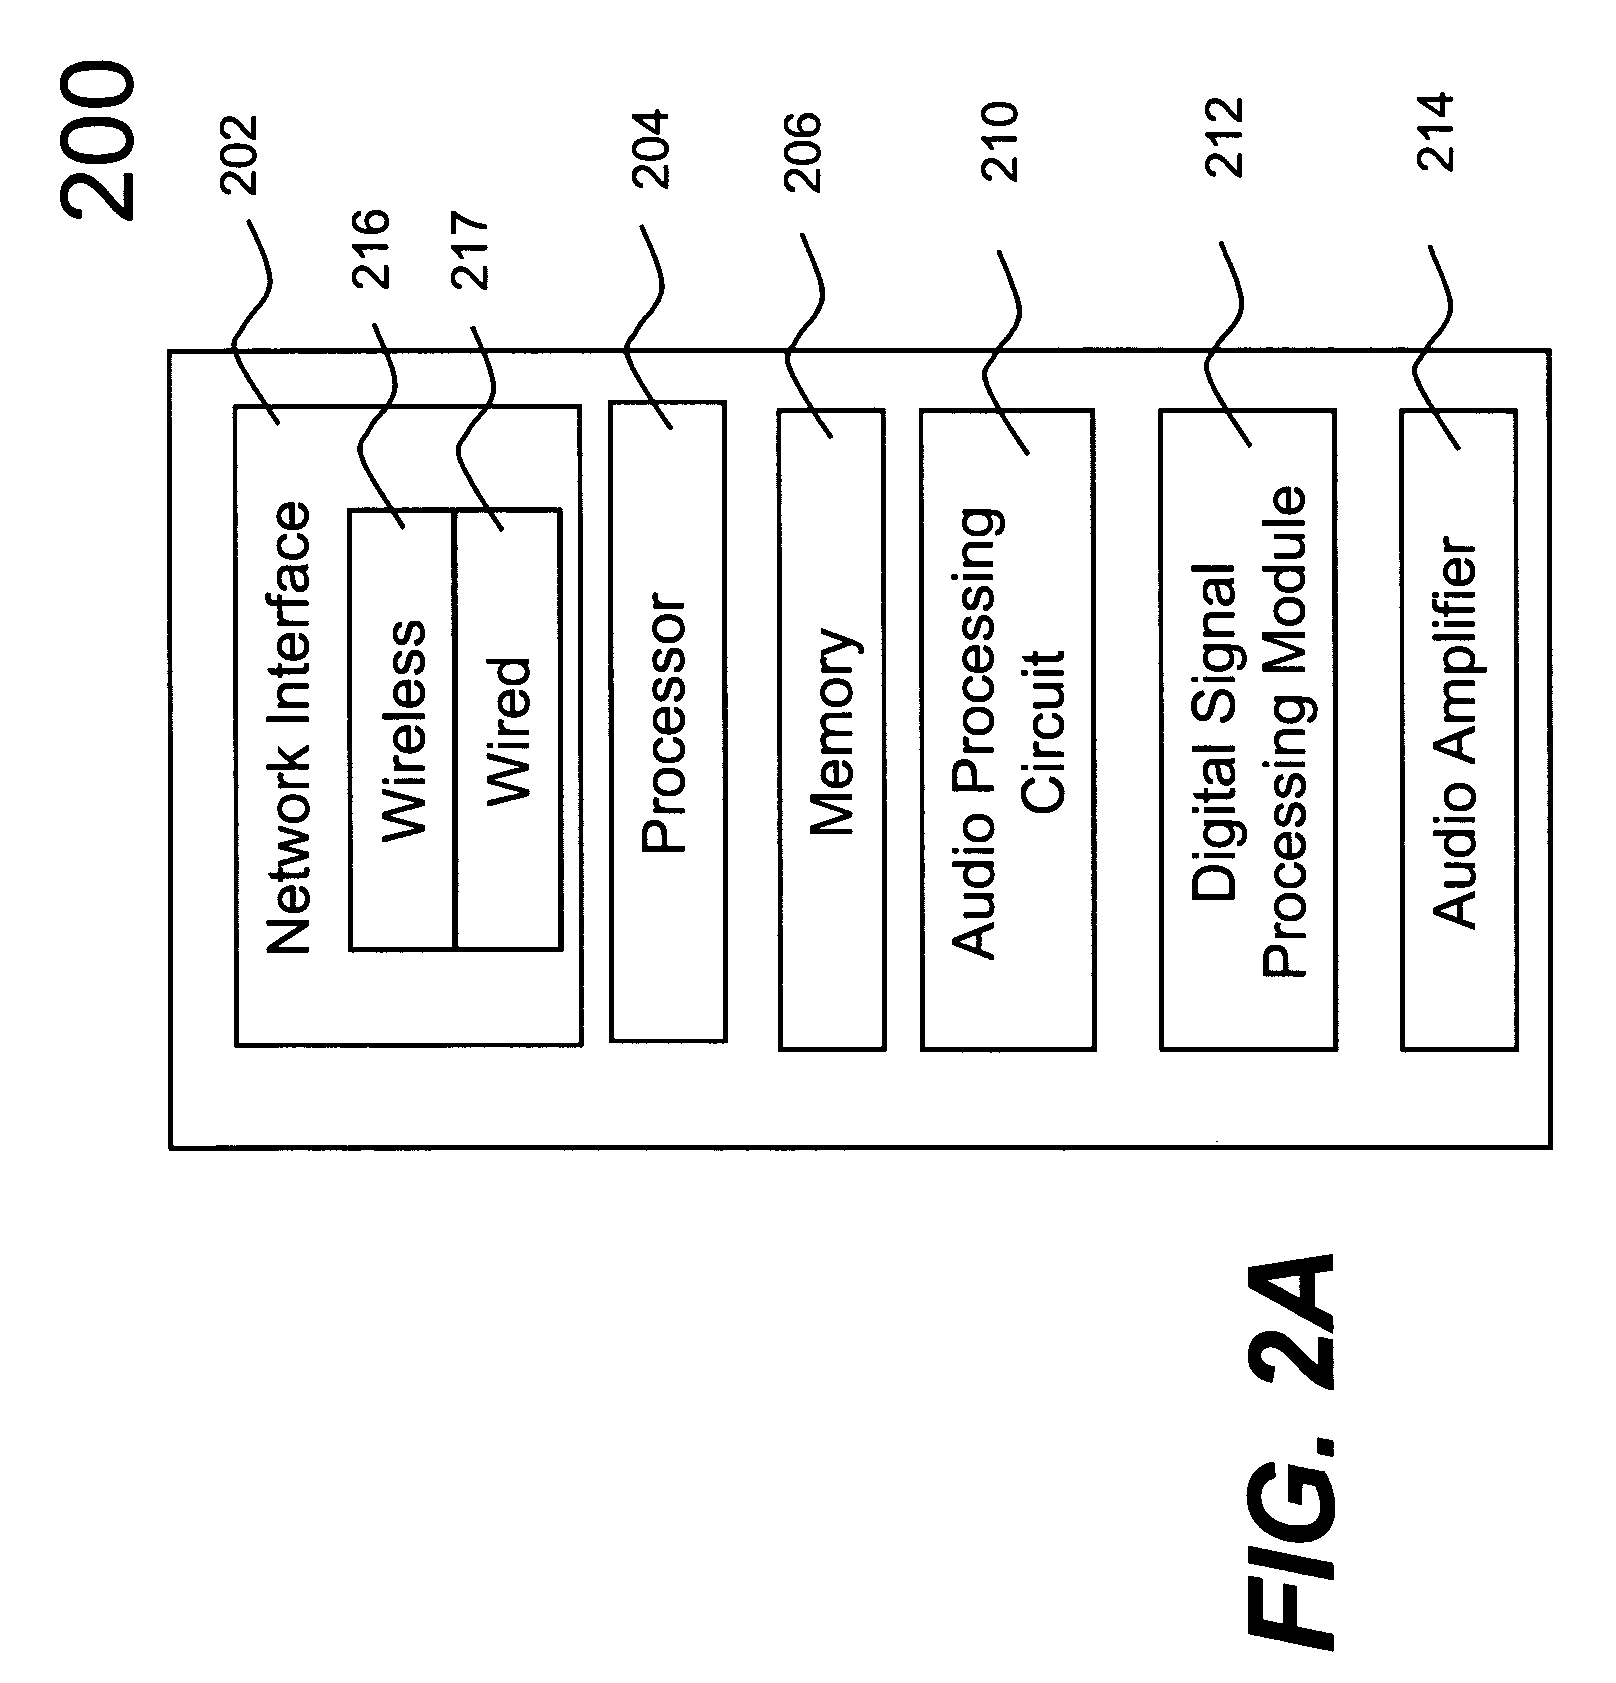 Method and apparatus for controlling multimedia players in a multi-zone system